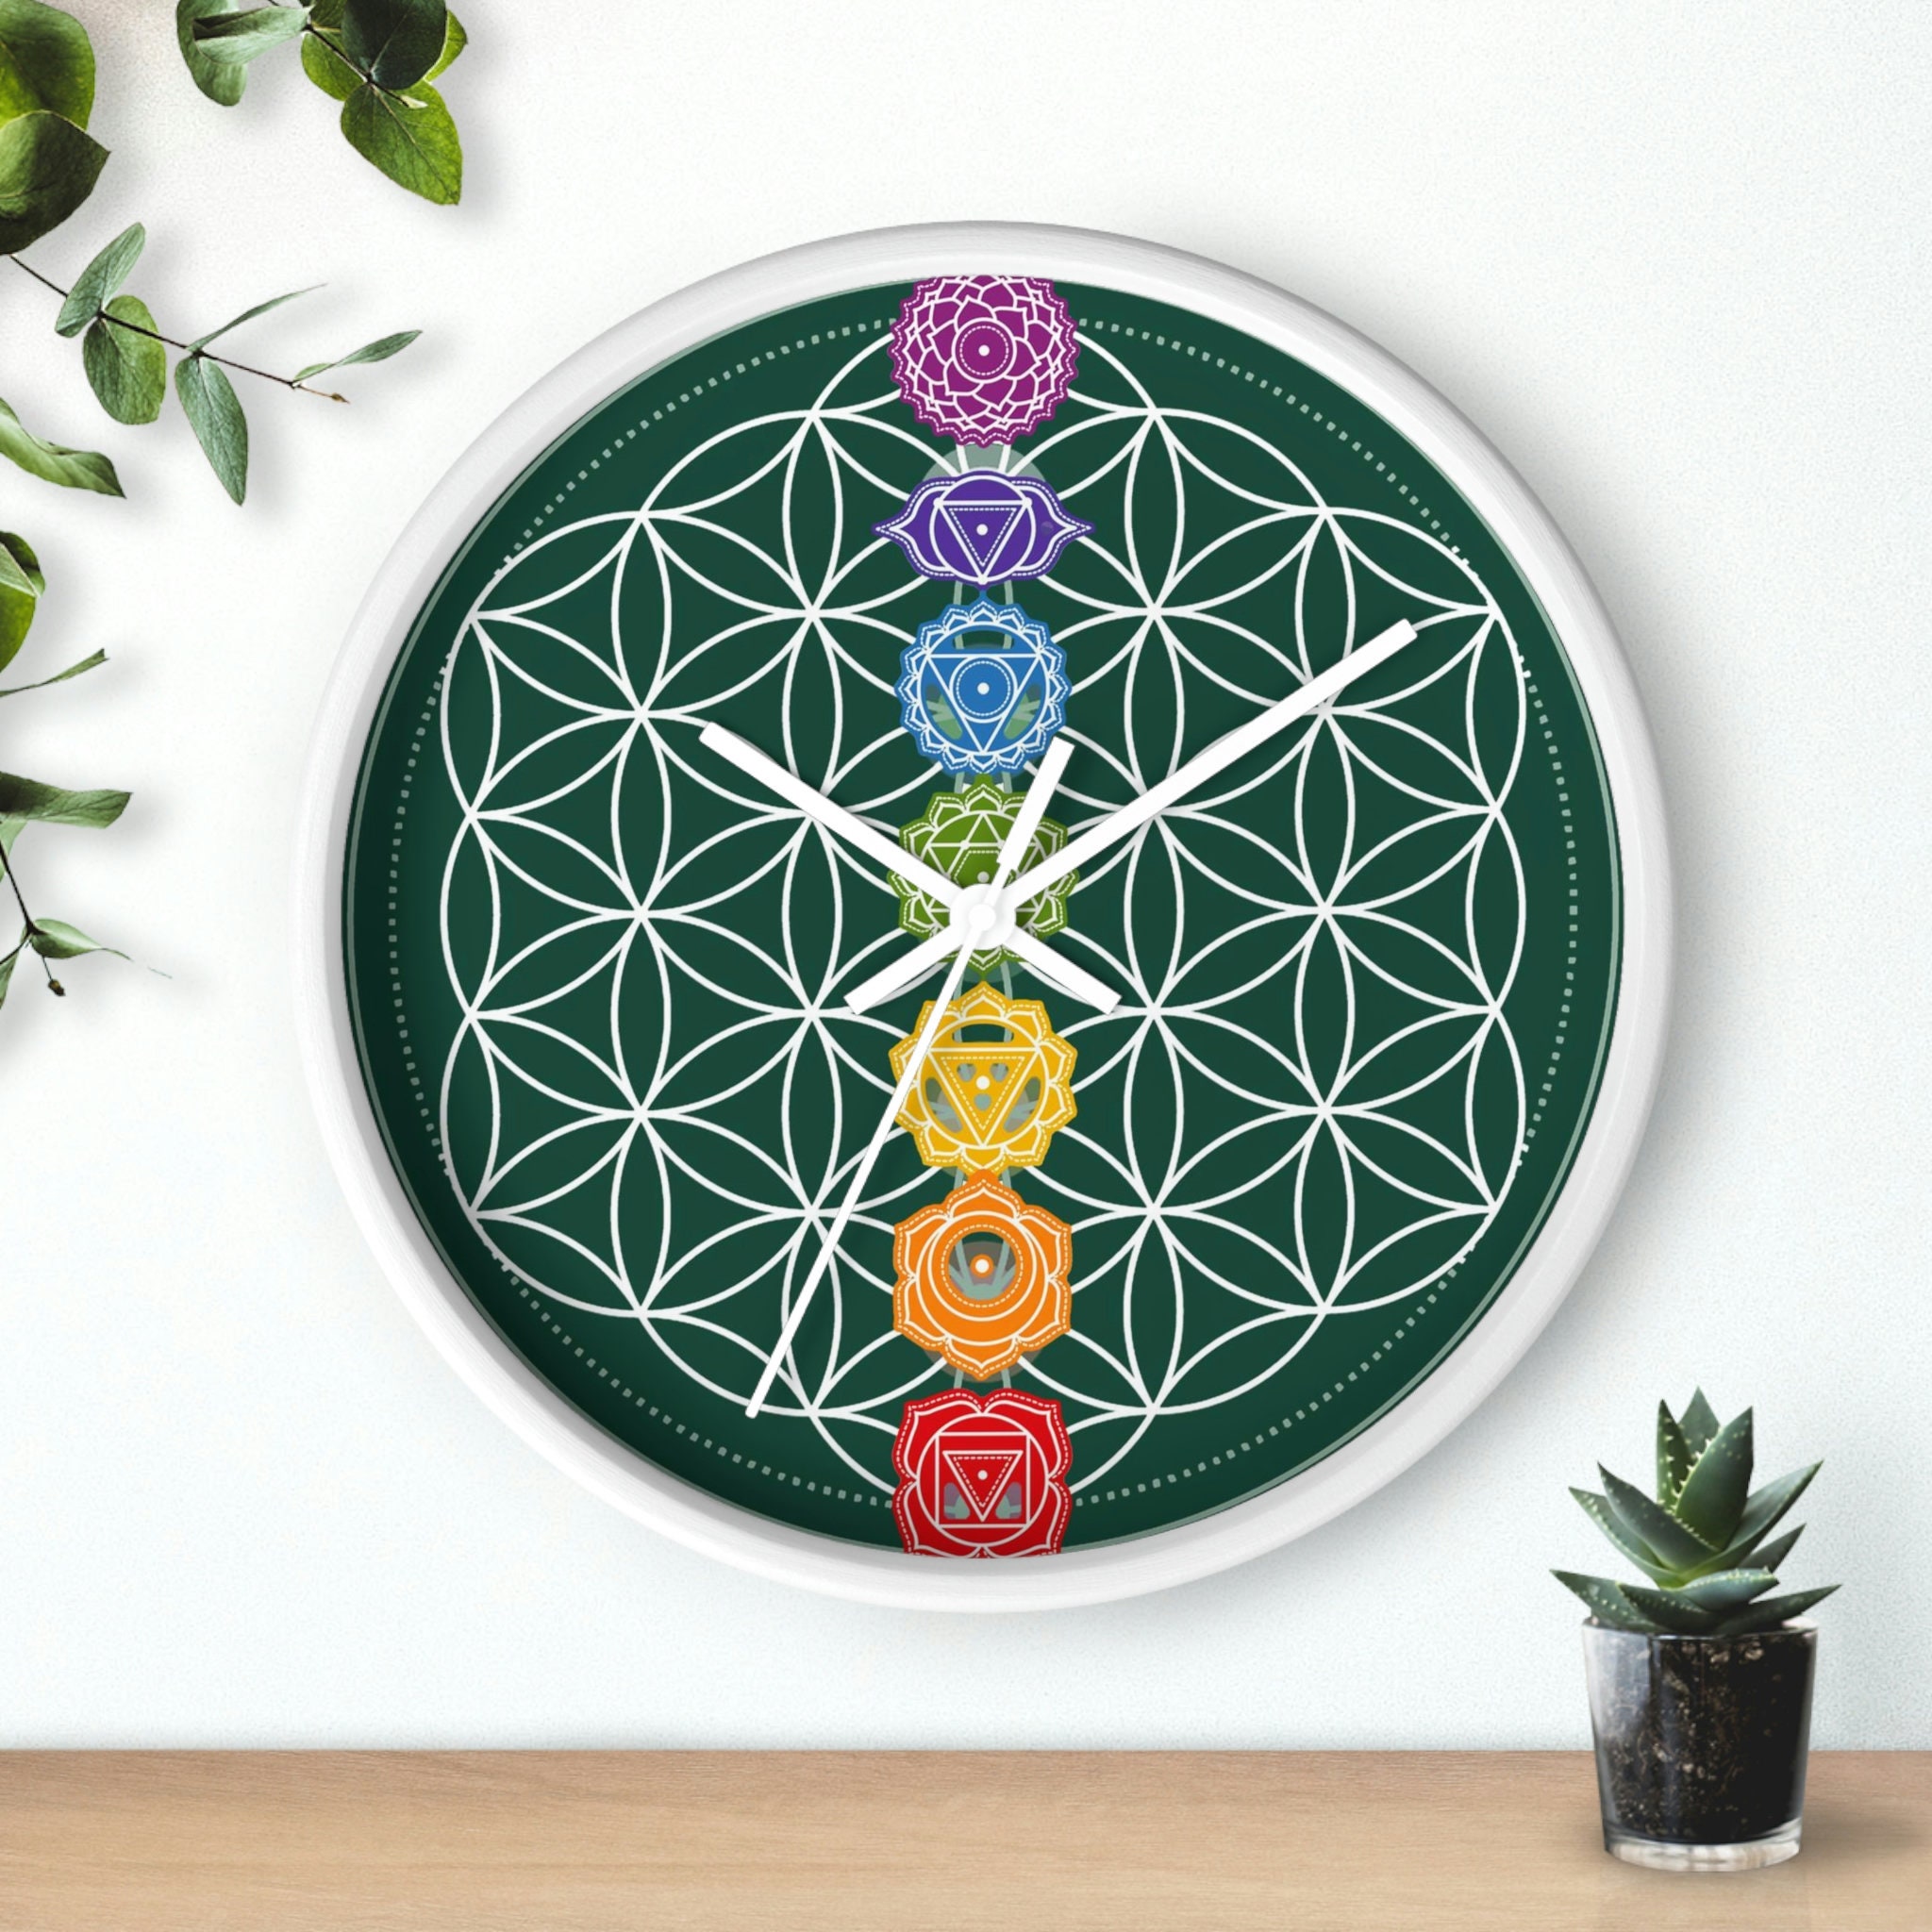 green white flower of life patch sacred geometry embroidery small size  variations are available Drunvalo Melchizedek